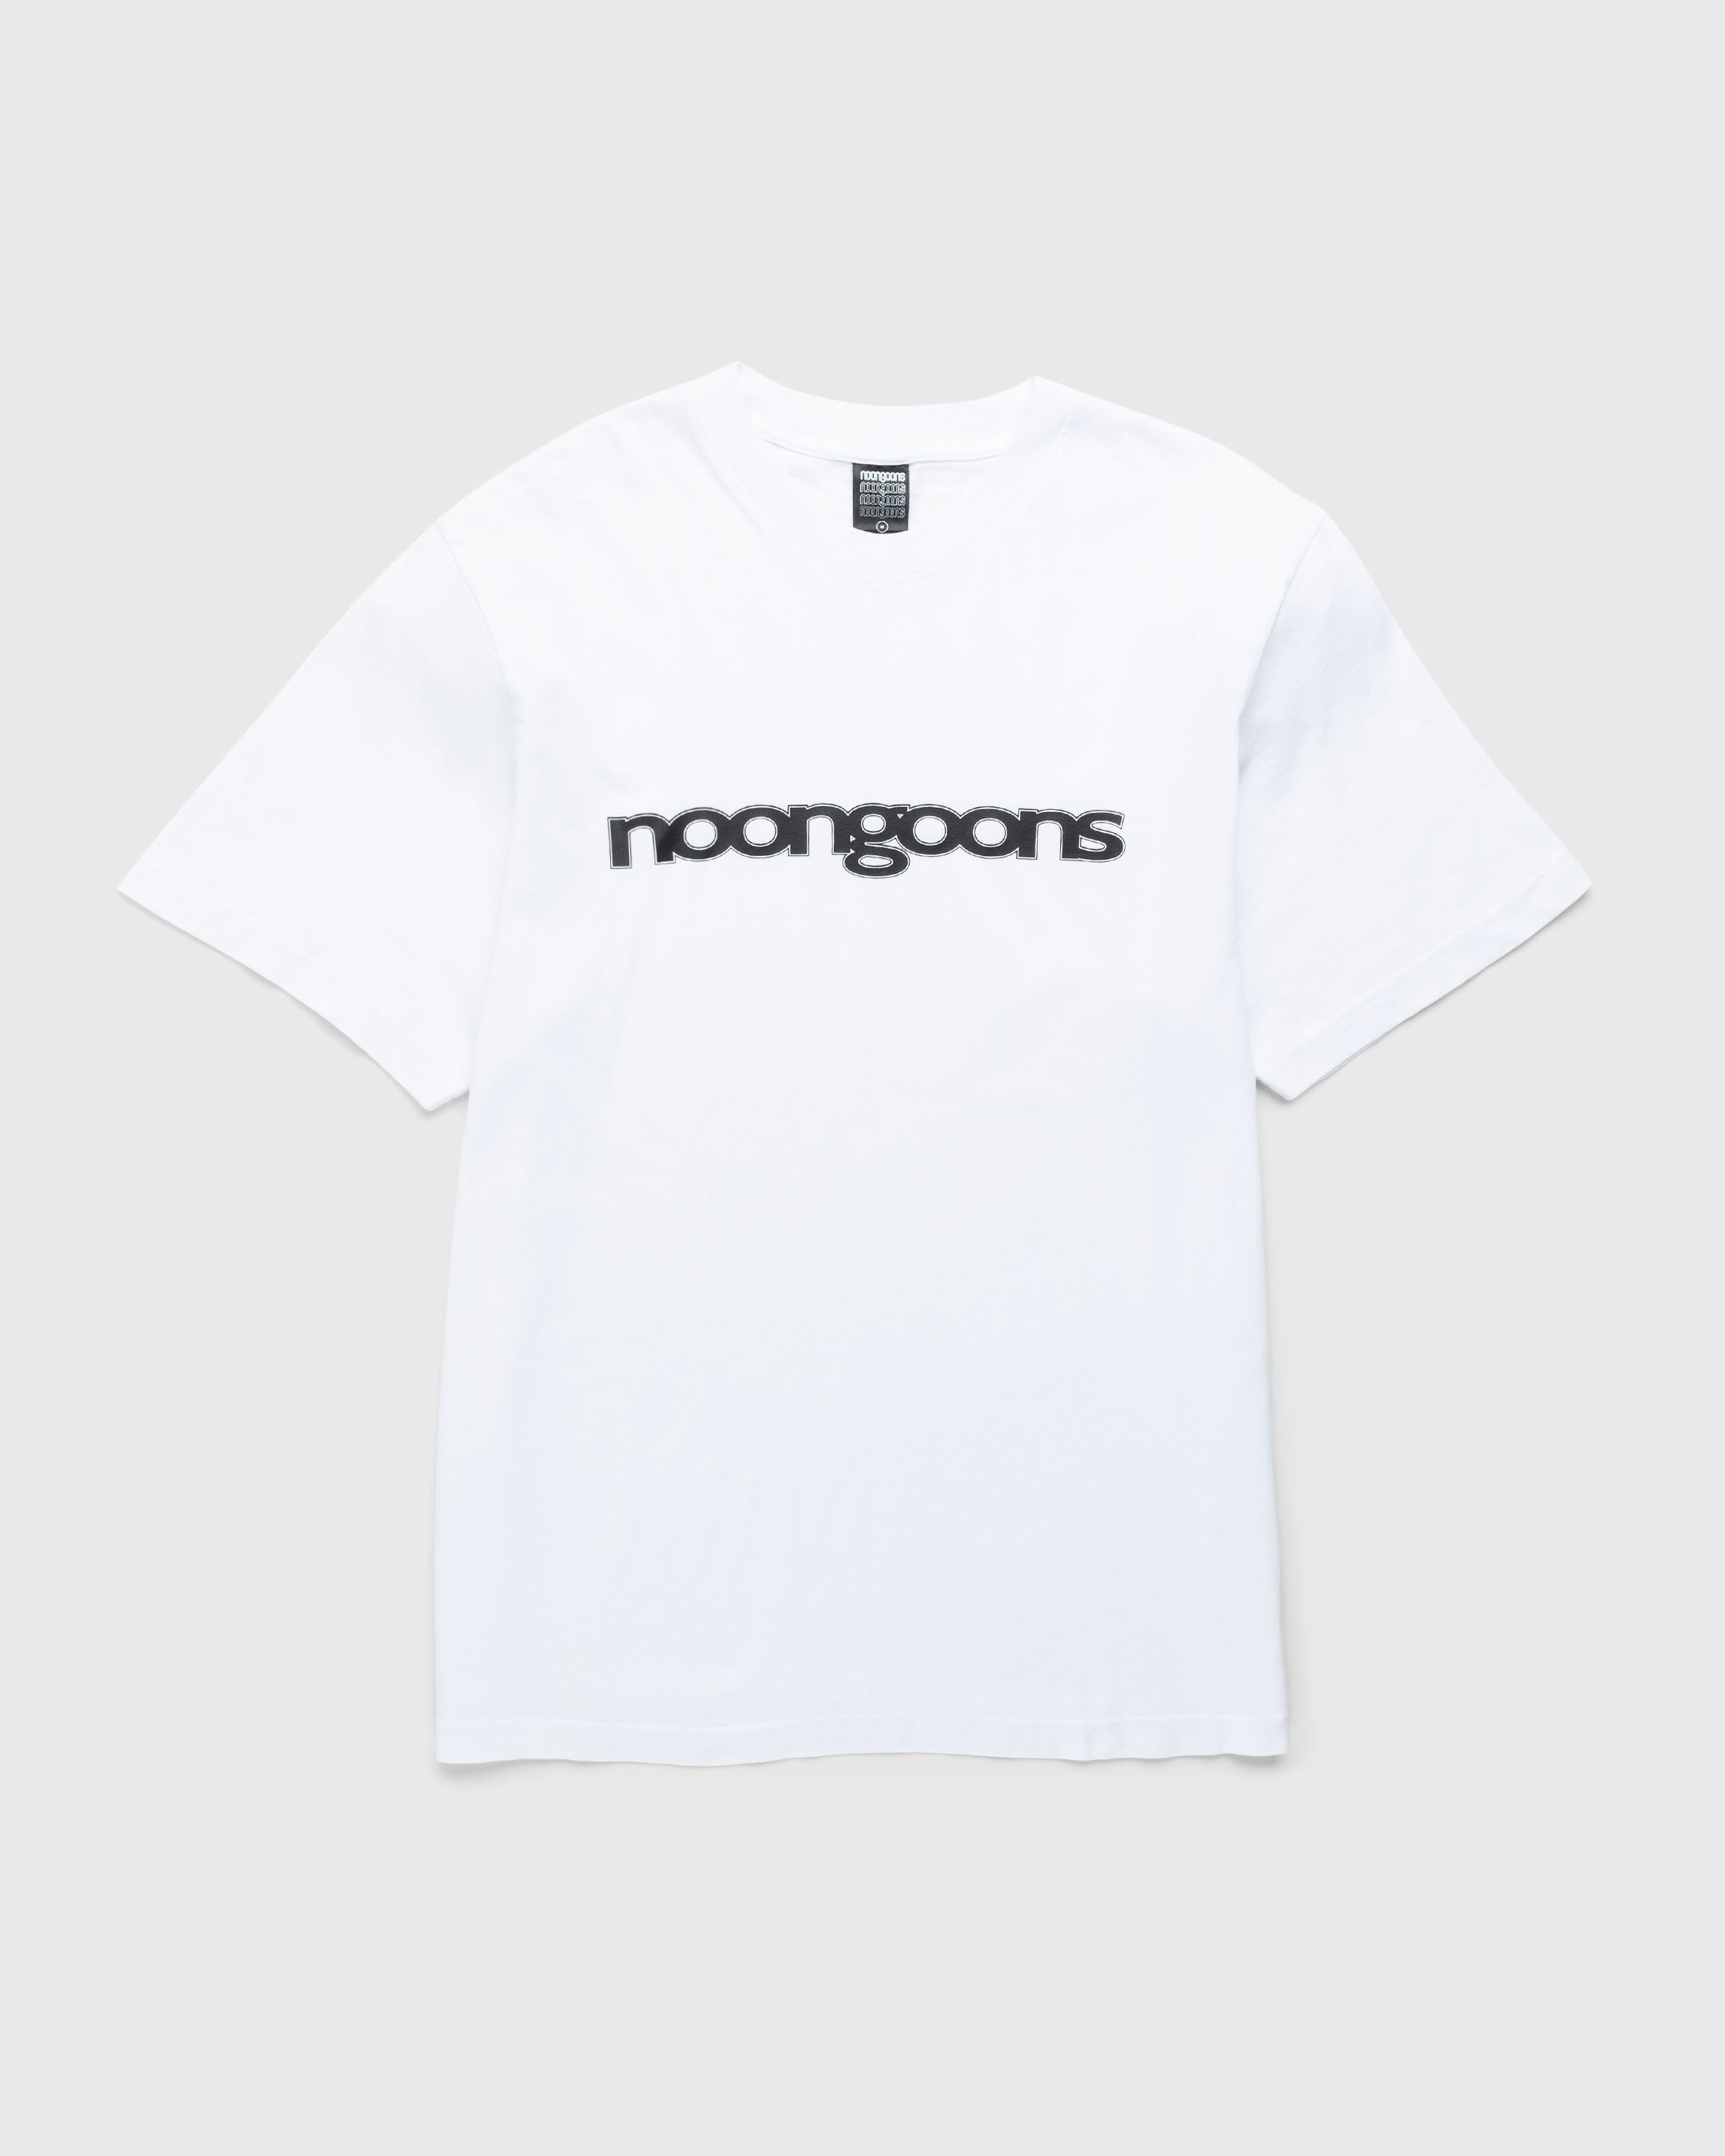 Børns dag synet Lav aftensmad Noon Goons – Very Simple T-Shirt White | Highsnobiety Shop